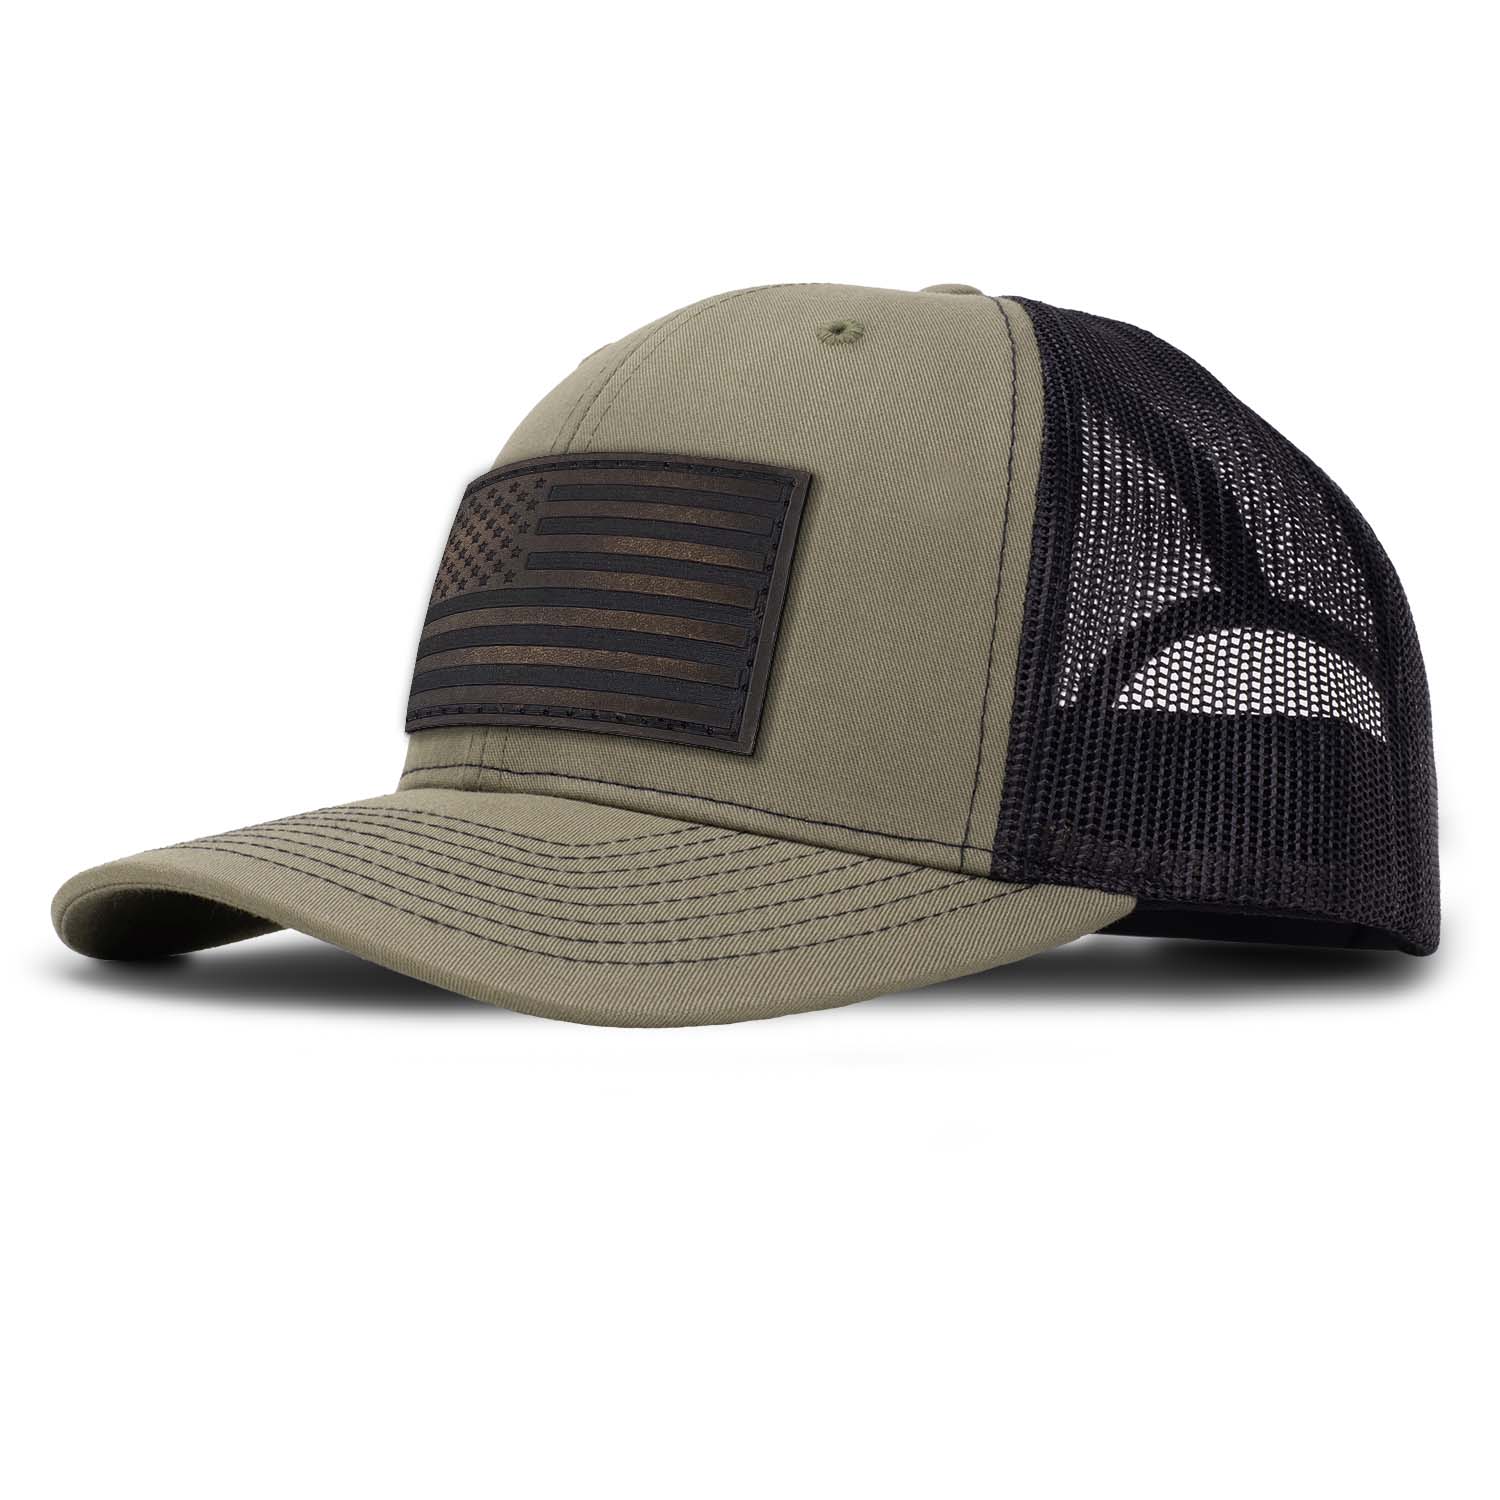 Revolution Mfg classic trucker hat in loden with black mesh with a dark brown full grain leather American flag patch